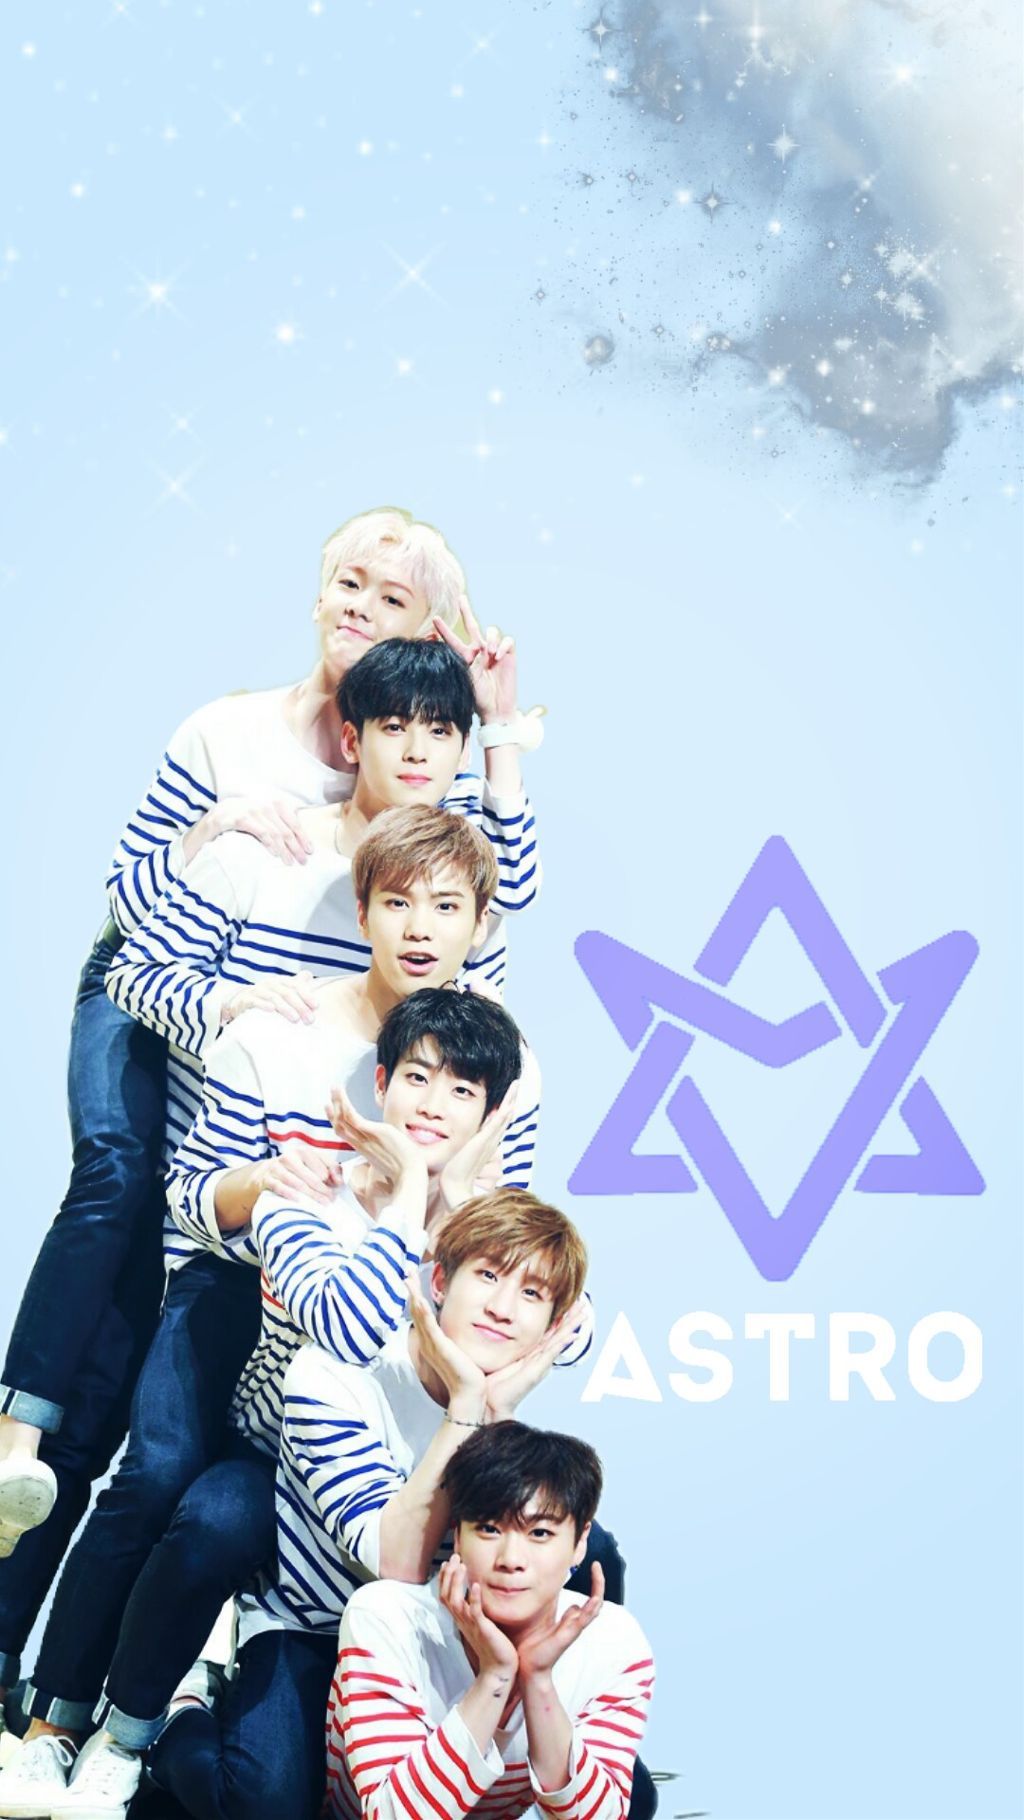 Astro Backgrounds